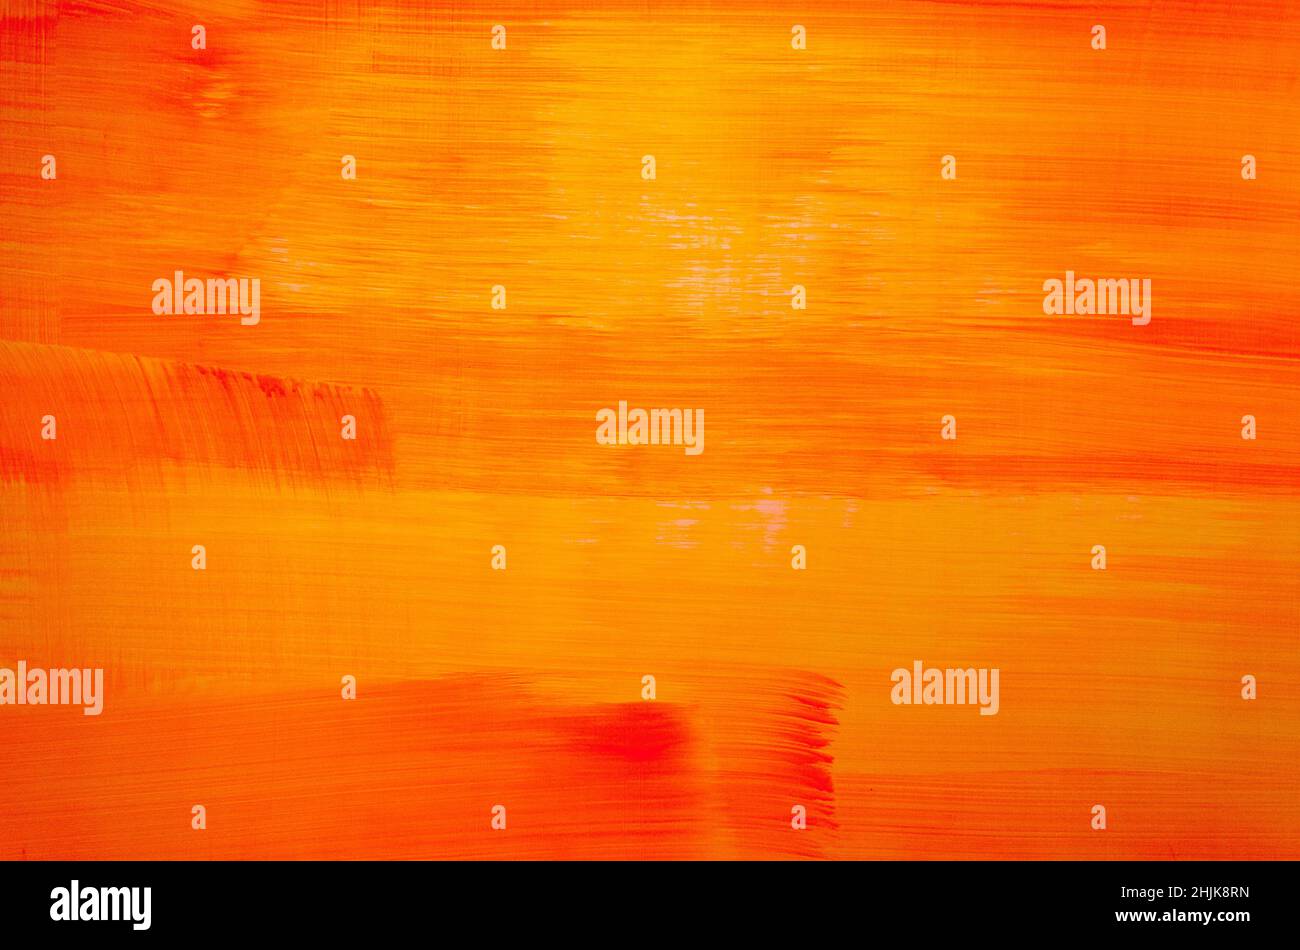 Abstract light red orange patterned wallpaper Stock Photo